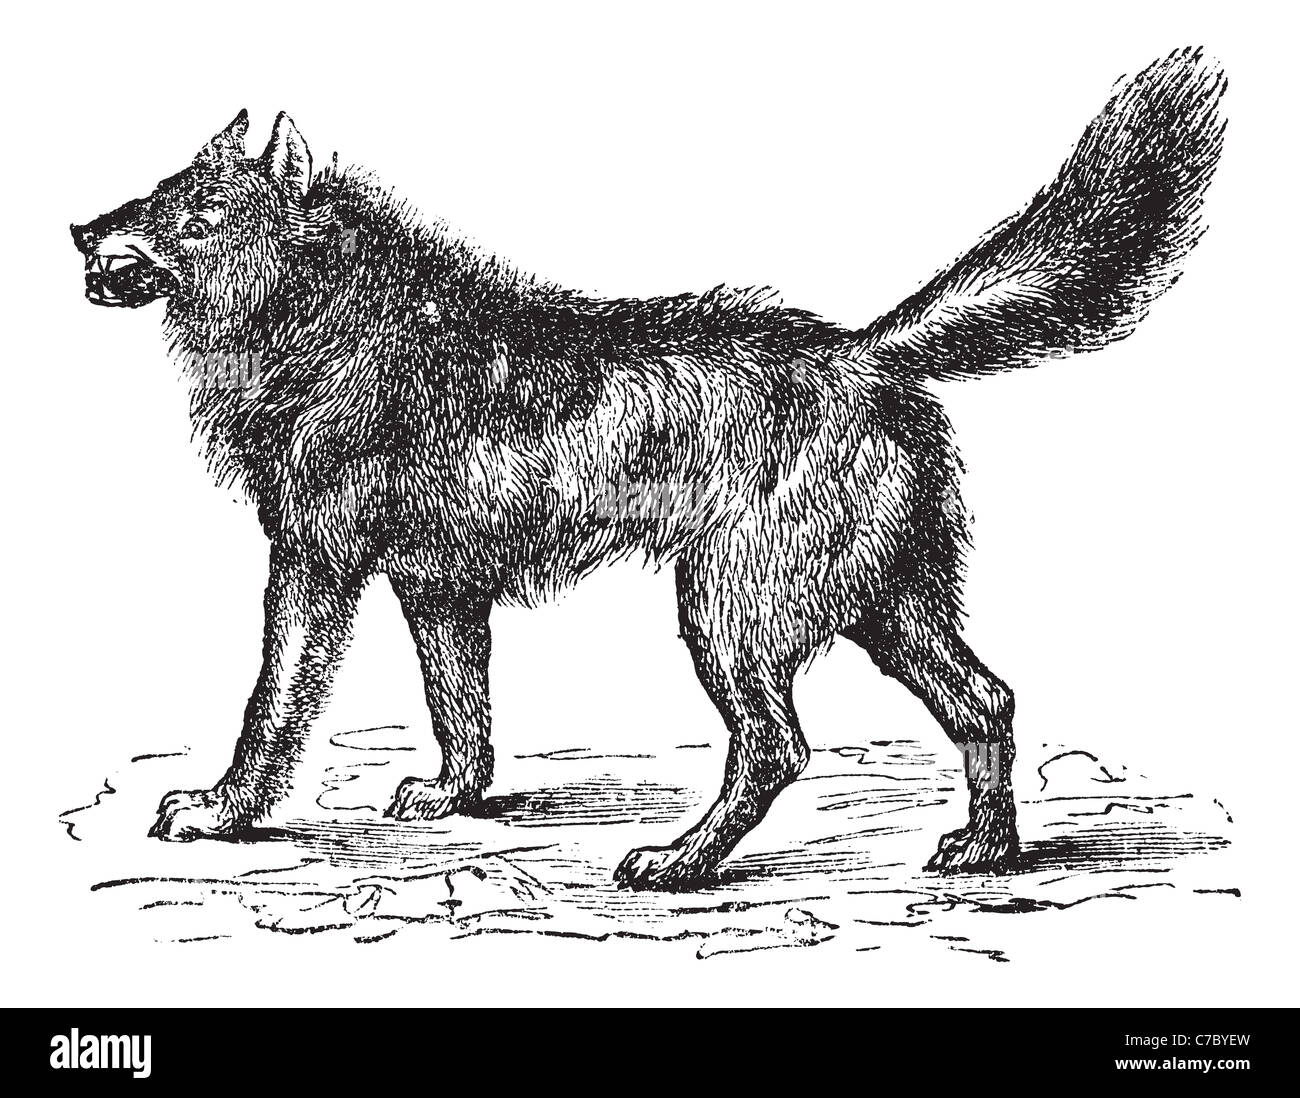 Eurasian Wolf or European, or Altaicus or lycaon or Grey wolf, vintage engraving. Old engraved illustration of Eurasian Wolf. Stock Photo